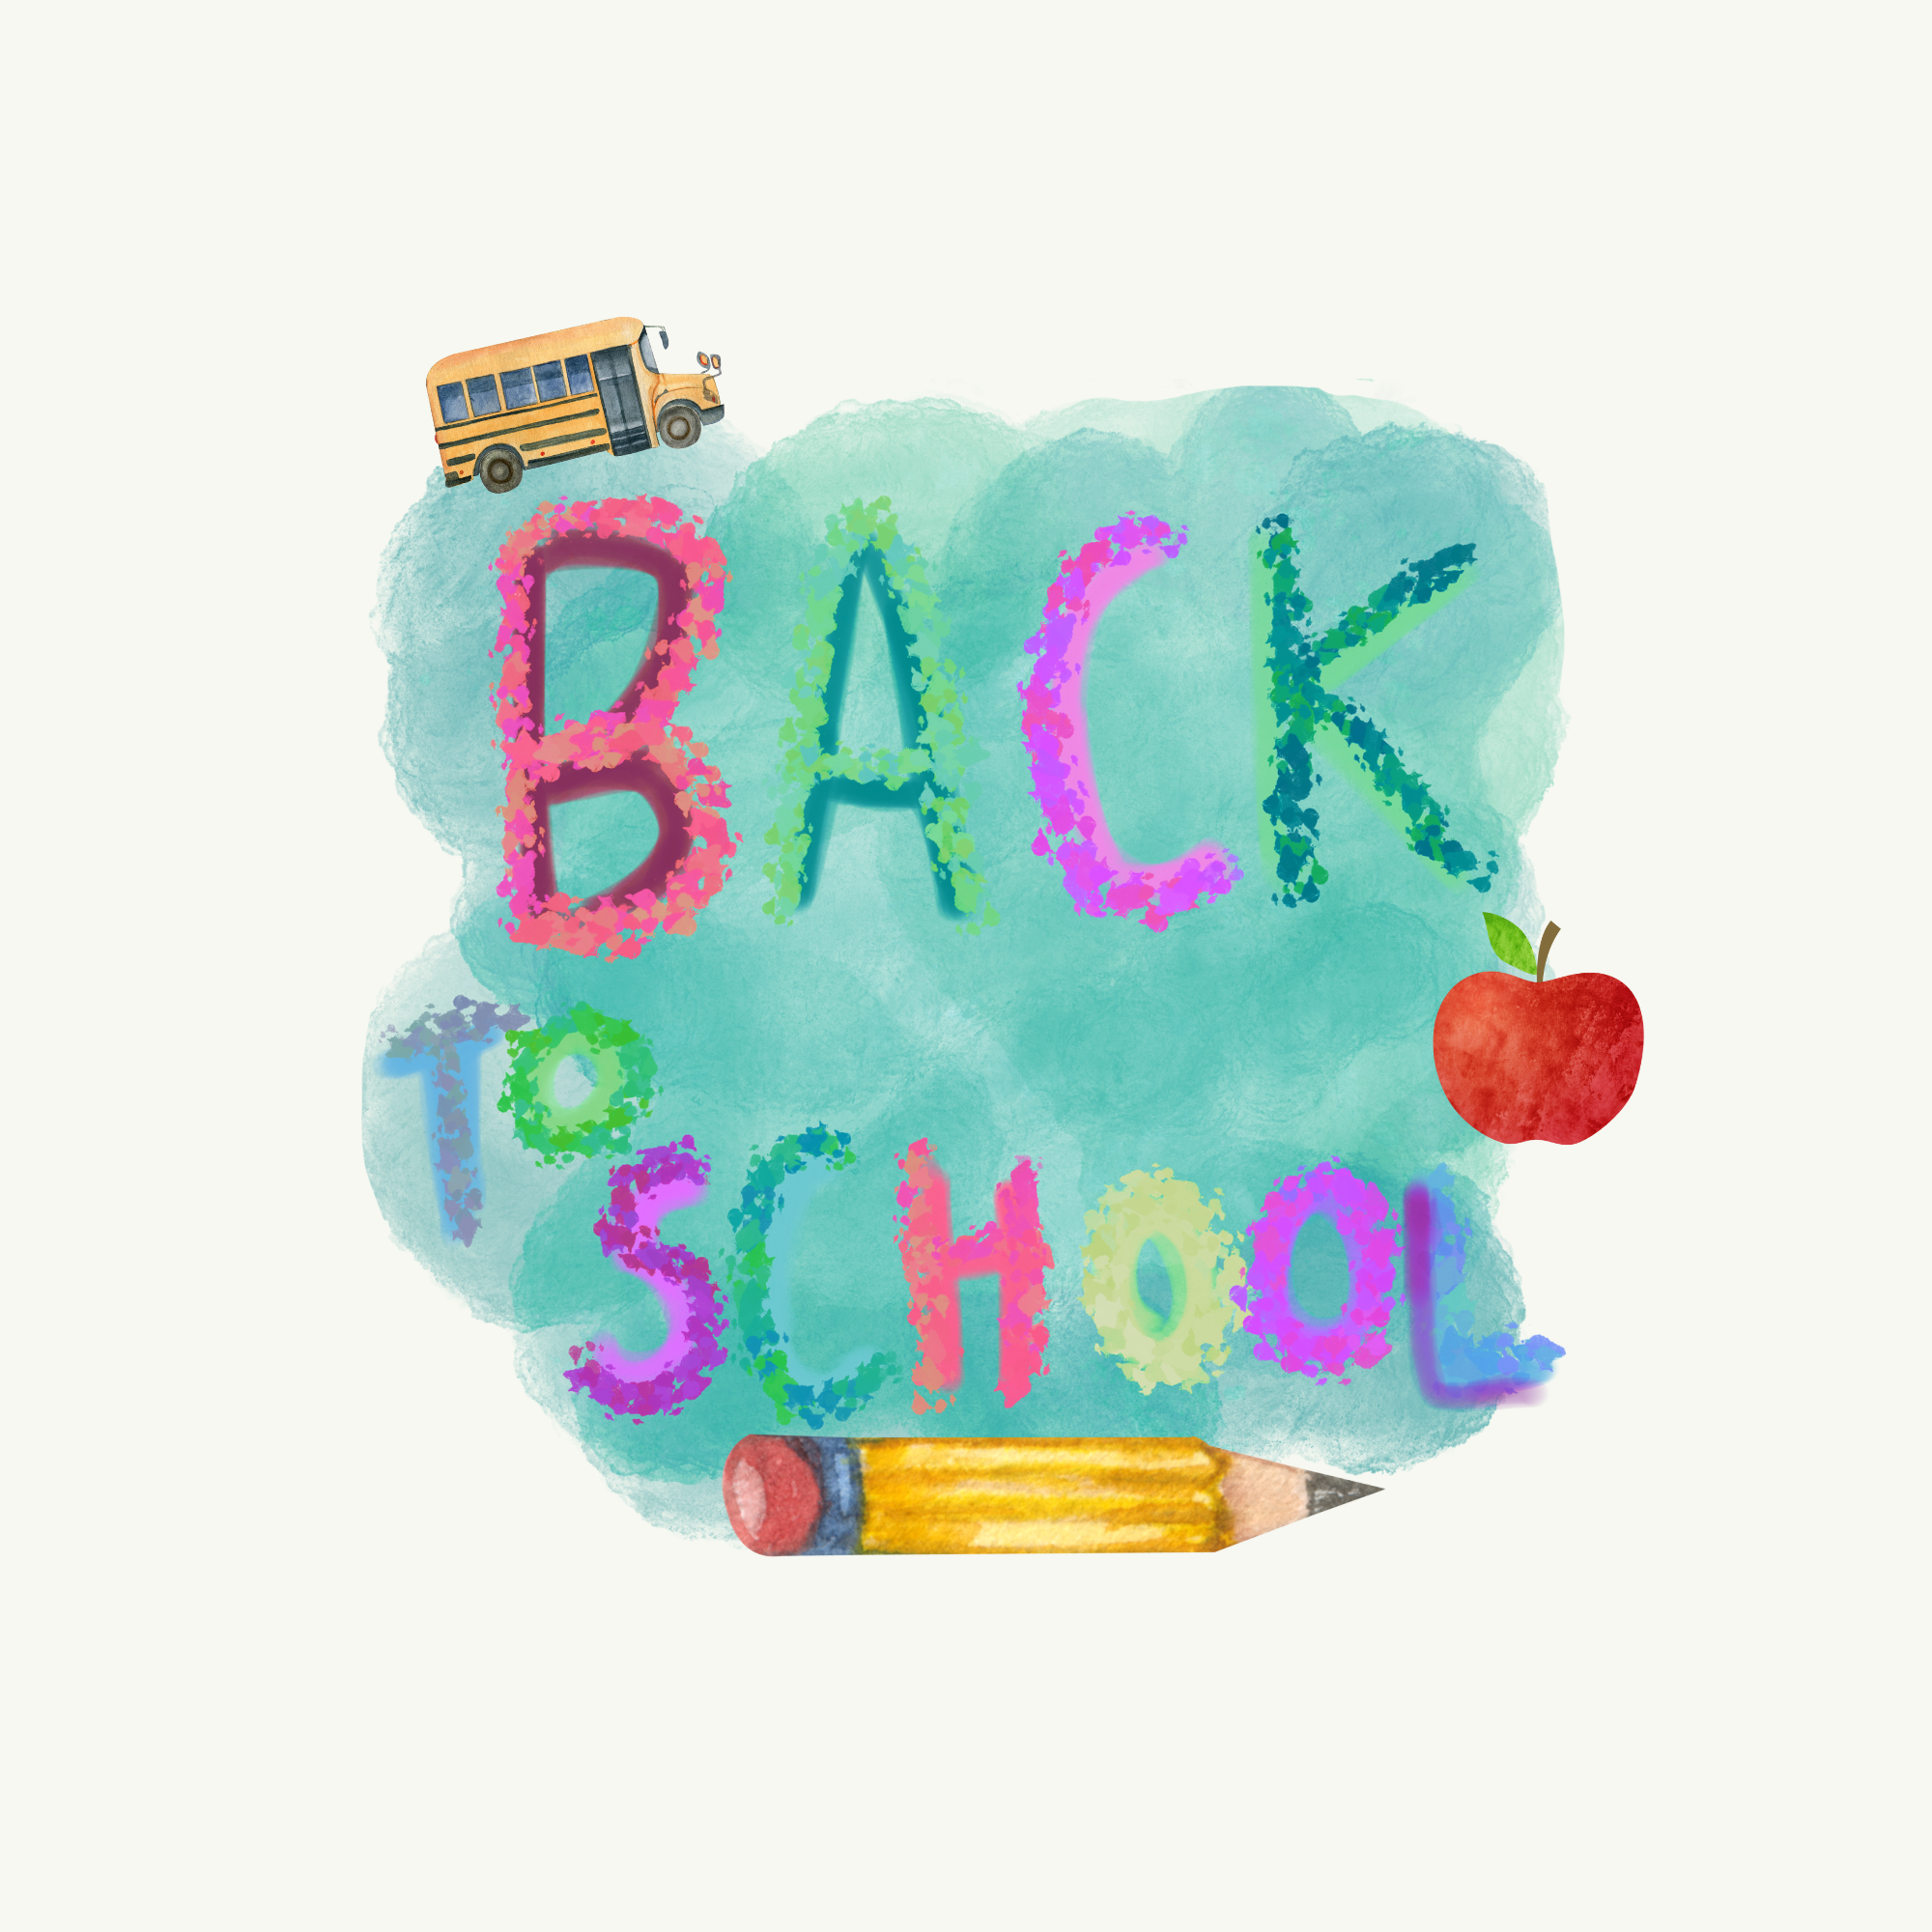 Watercolor Artist Clipart, Painting Clipart, PNG, Back to School